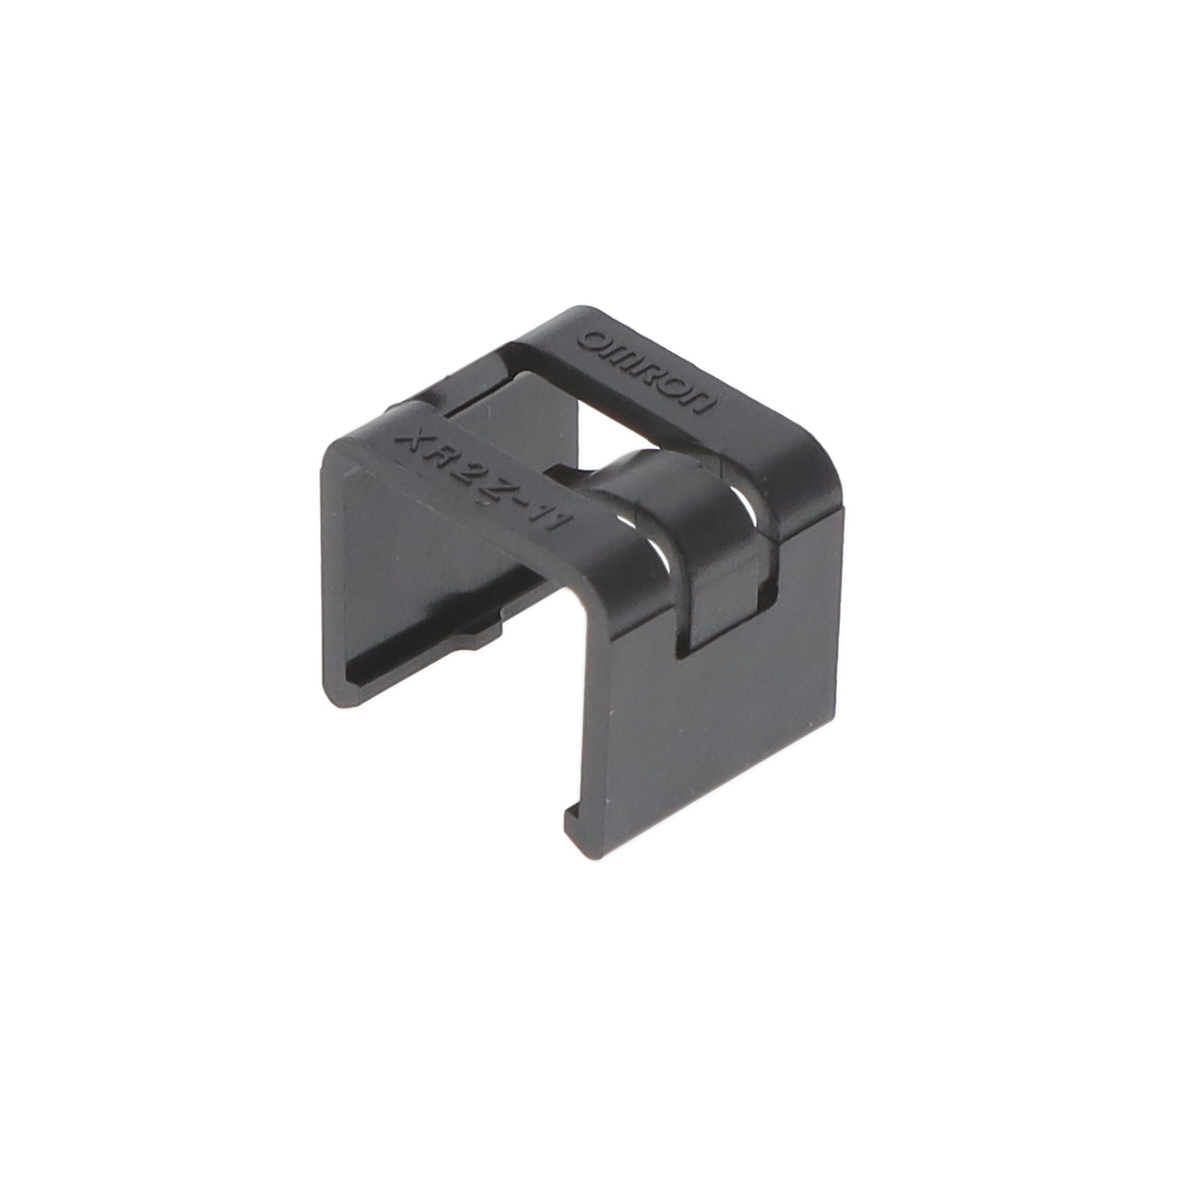 【XR2Z-11】CONN SOCKET CLAMP FOR IC SOCKETS